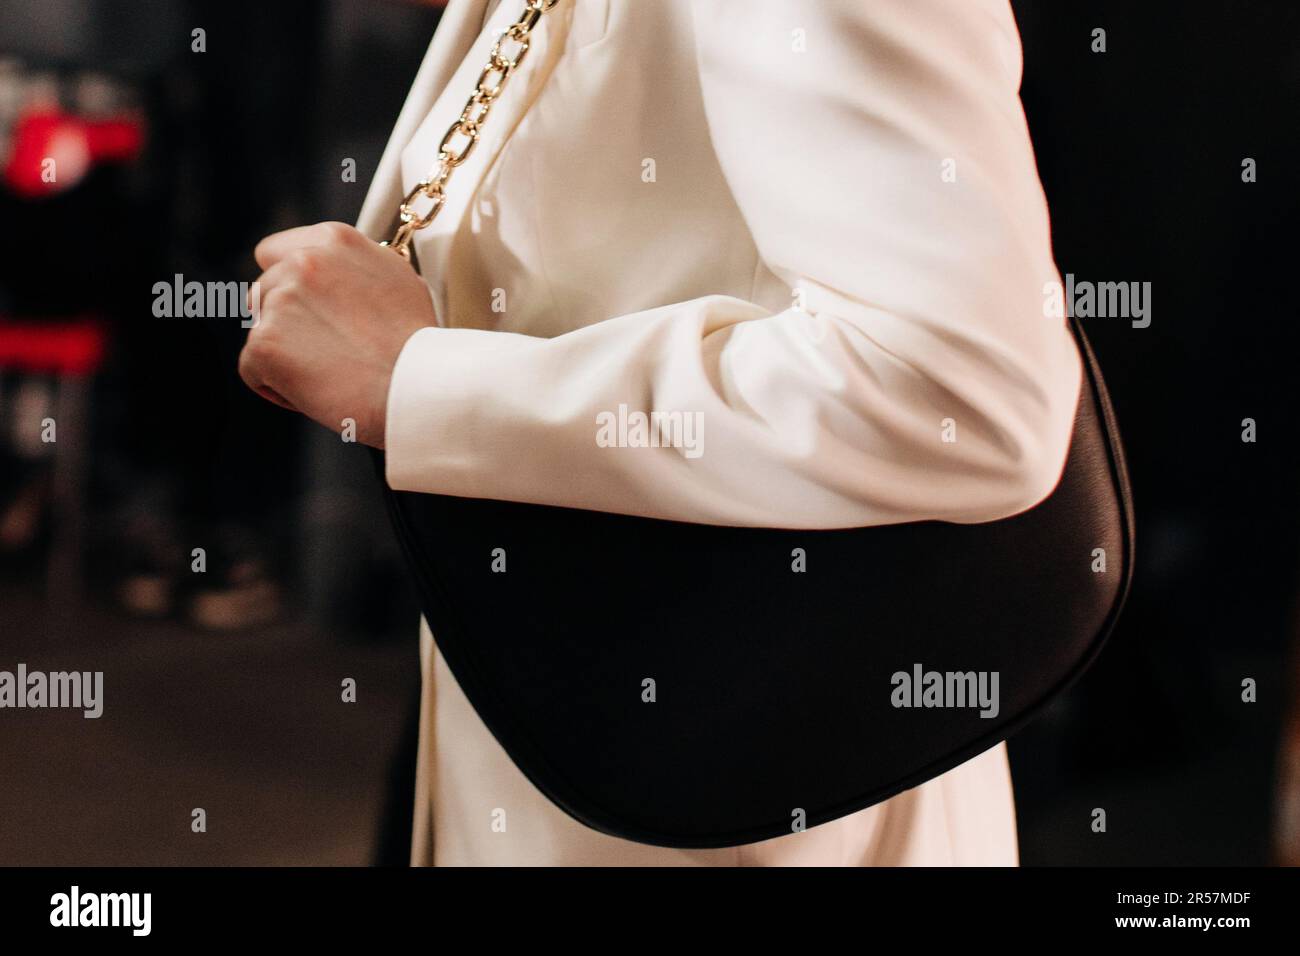 Fashion details of white classy jacket and black leather handbag with golden chain. Style, design of women's clothing and accessories. Stock Photo